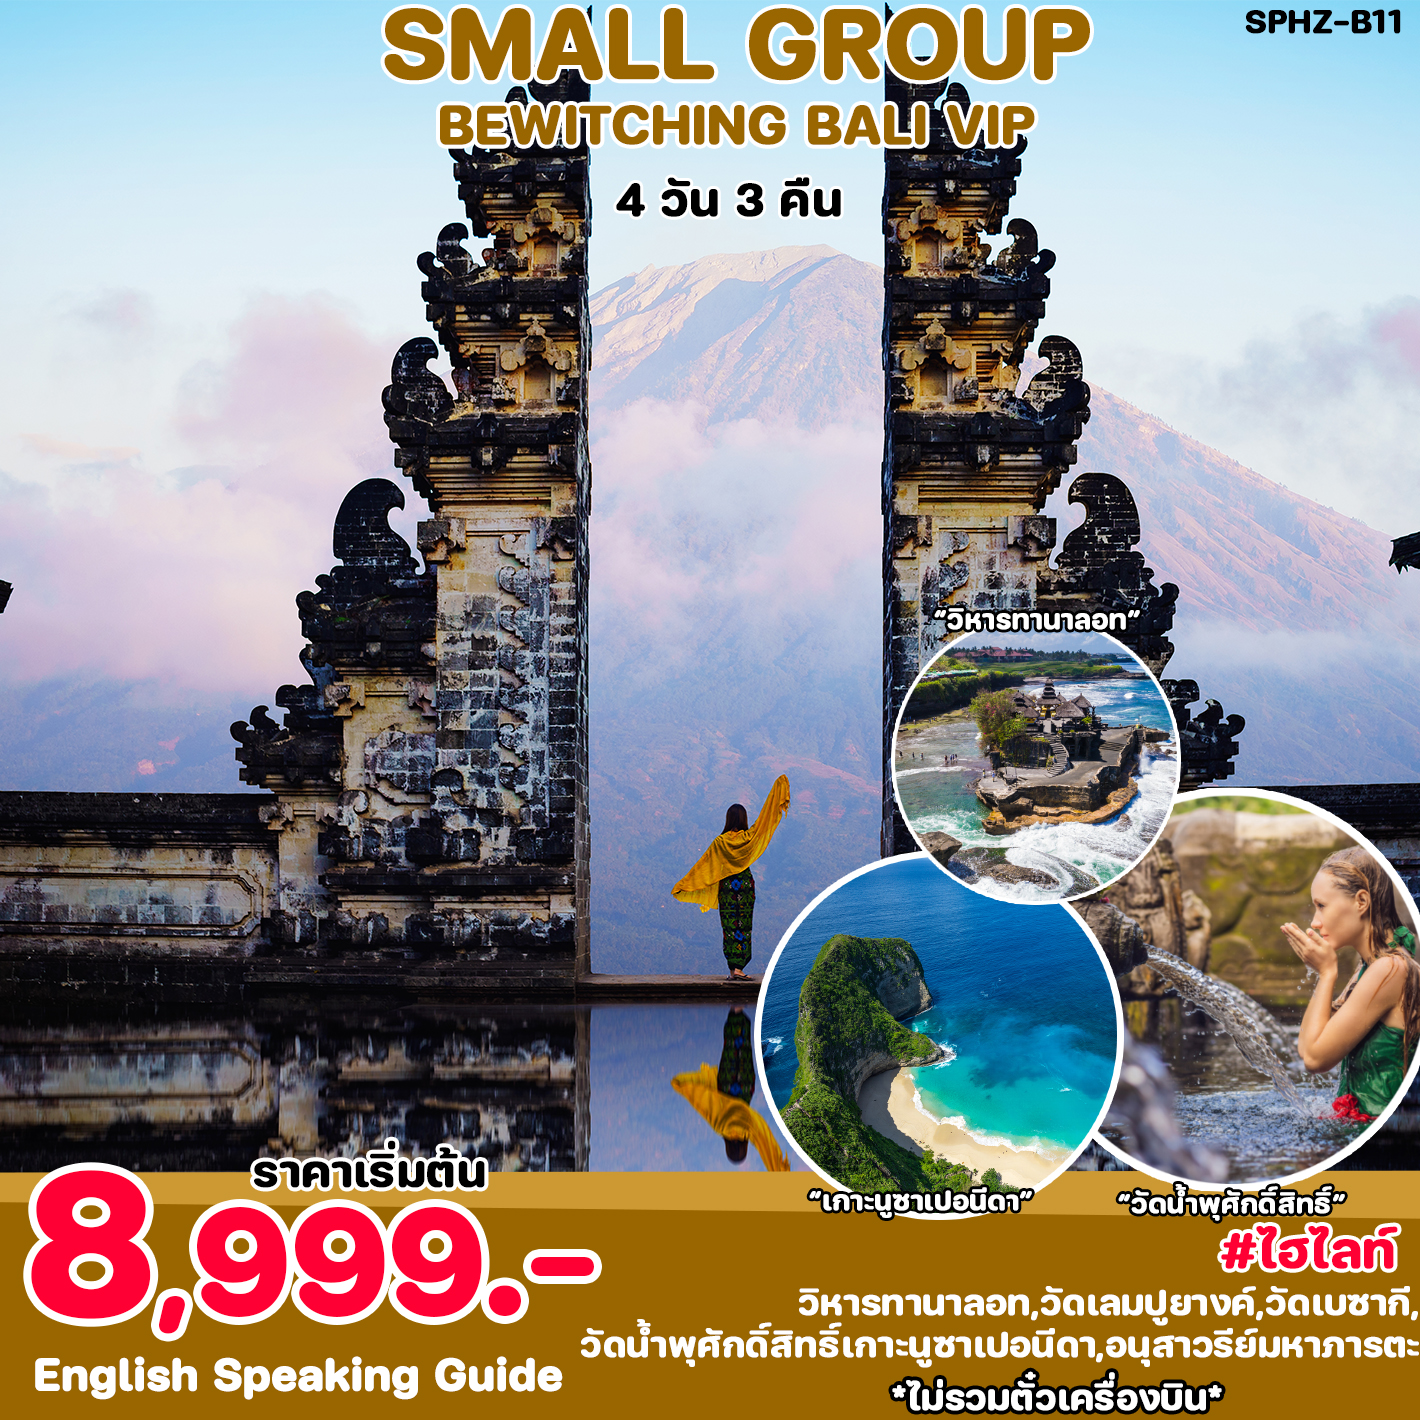 SPHZ-B11- Bewitching Bali VIP Small Group 4 DAY (FD) JUNE - DEC 24